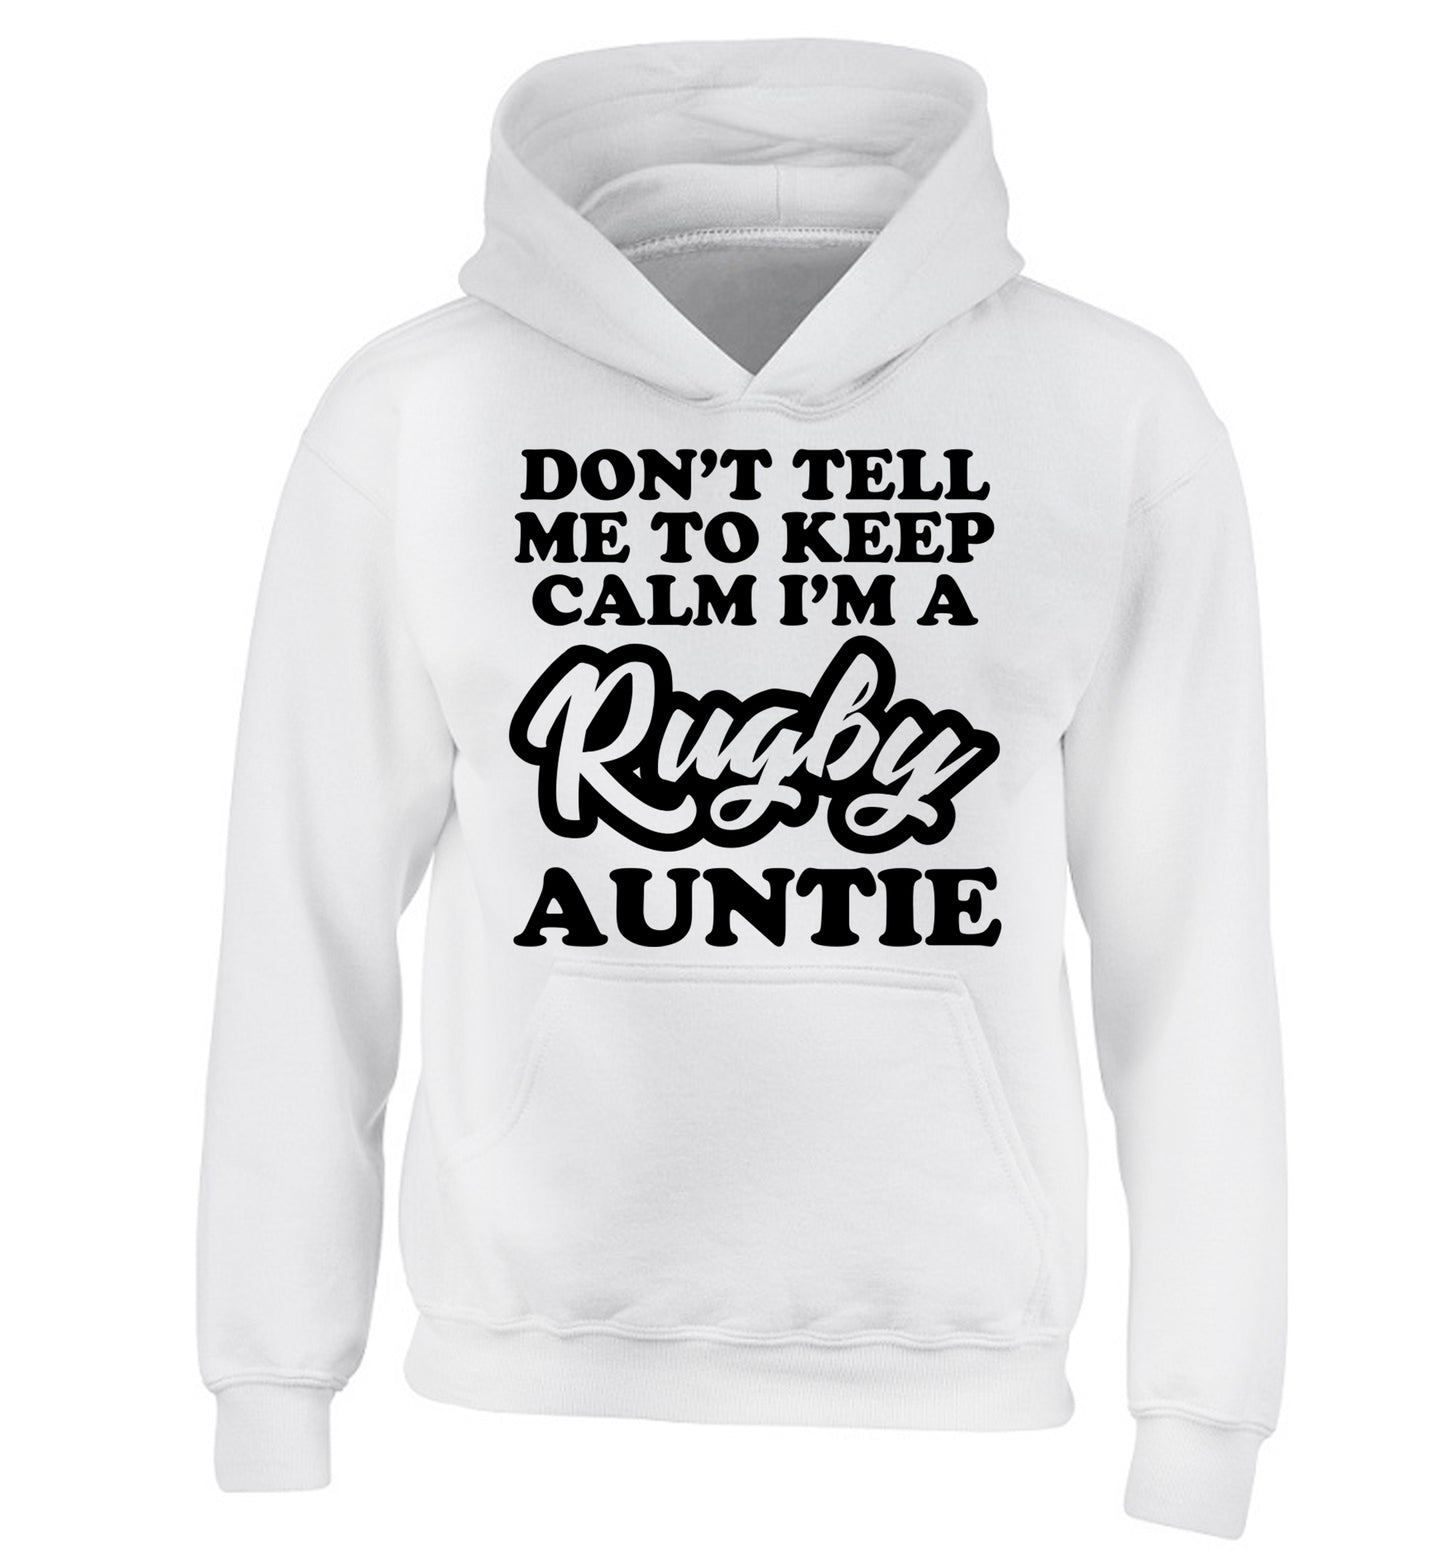 Don't tell me keep calm I'm a rugby auntie children's white hoodie 12-13 Years